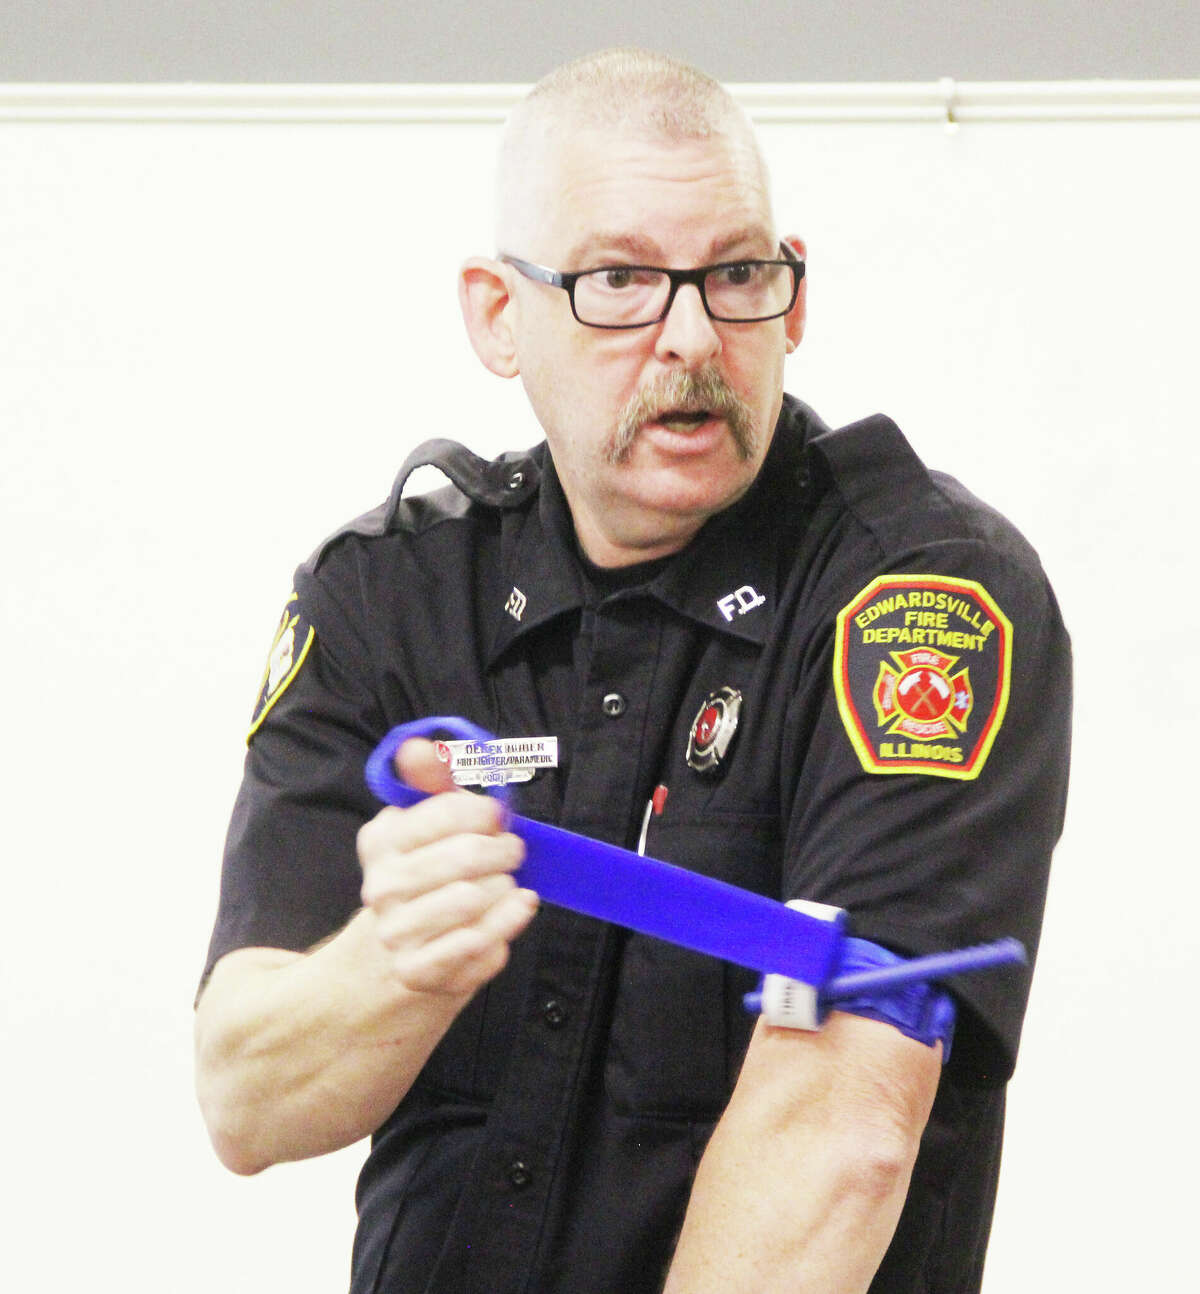 Edwardsville Firefighter/Paramedic Derek Huber demonstrates how to put on a tourniquet during a "Stop the Bleed" class Thursday at the Edwardsville Public Safety Building. May is "Stop the Bleed Month." The program is designed to teach people how to deal with excessive bleeding, which is a major cause of preventable death.